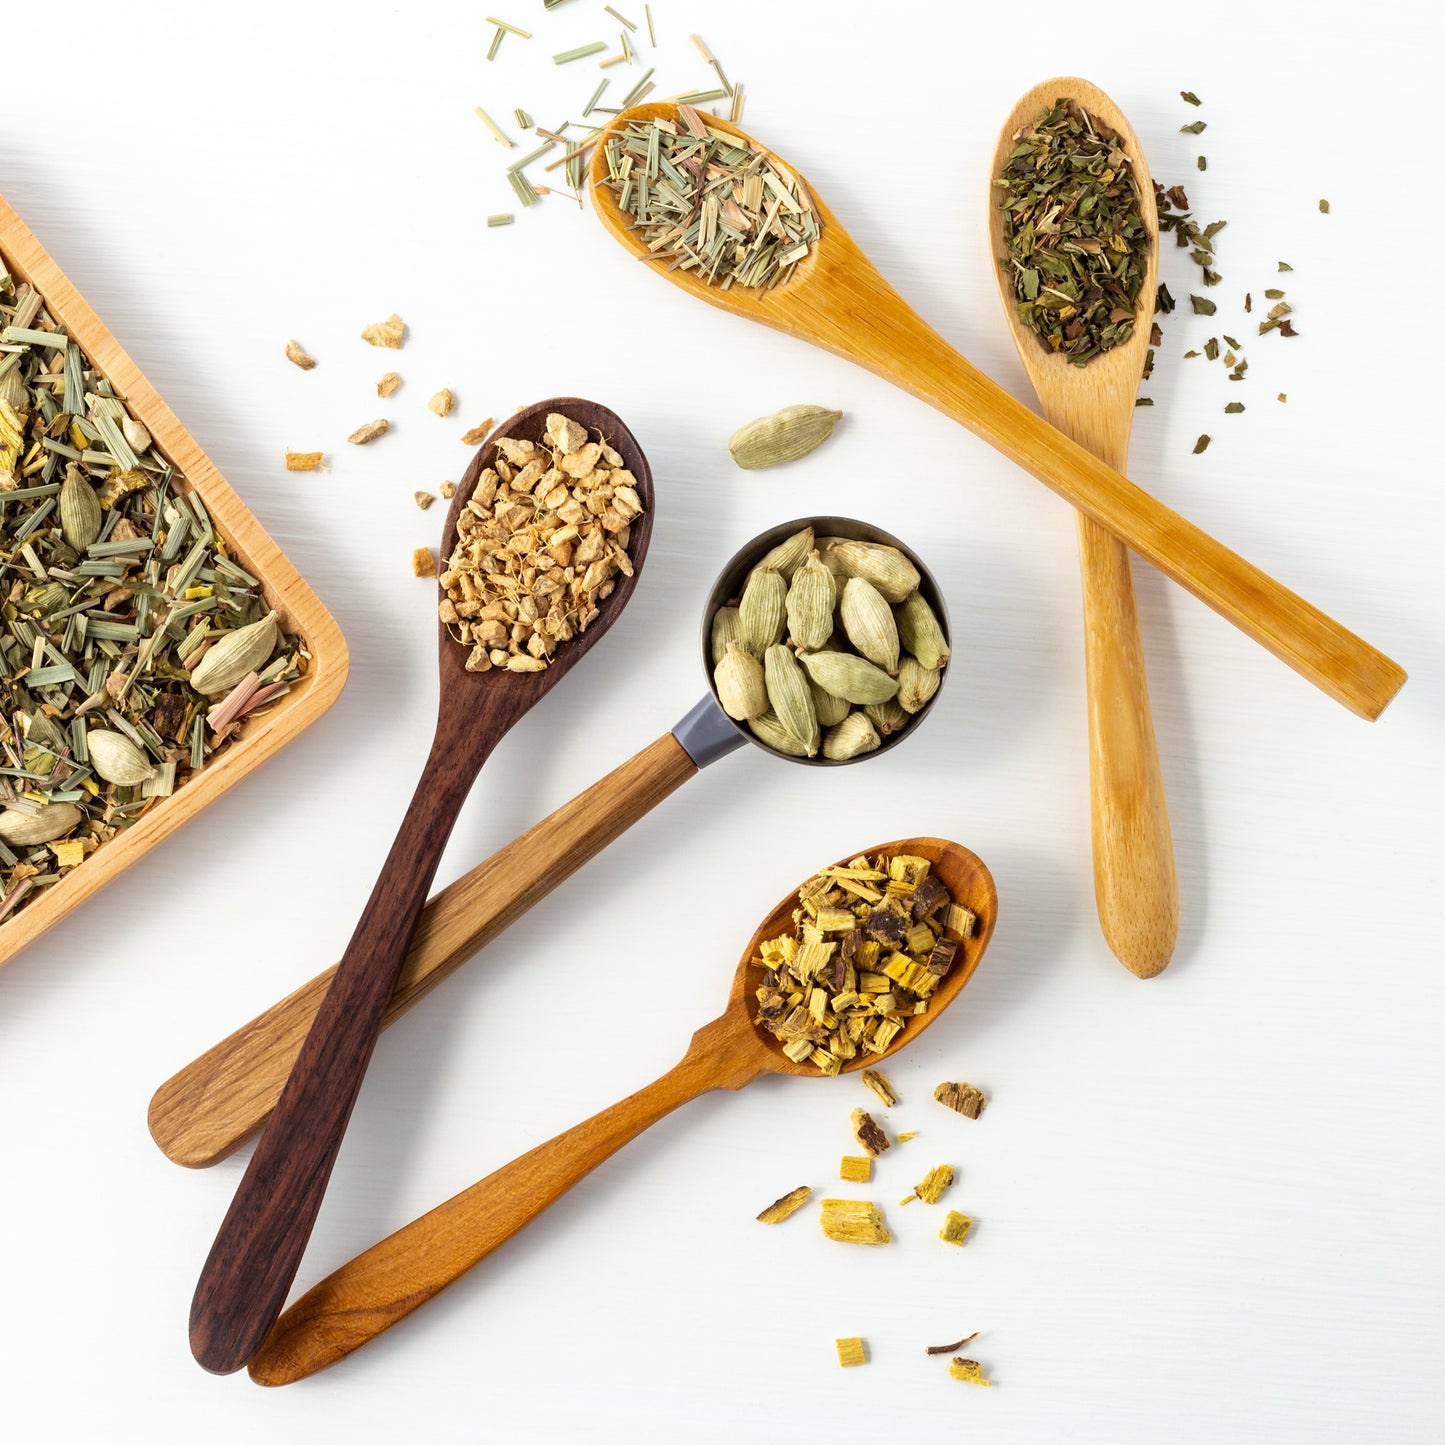 Sing Your Song organic herbal tea ingredients shown in wood spoons (peppermint, ginger, cardamom pods, licorice root, and lemongrass)